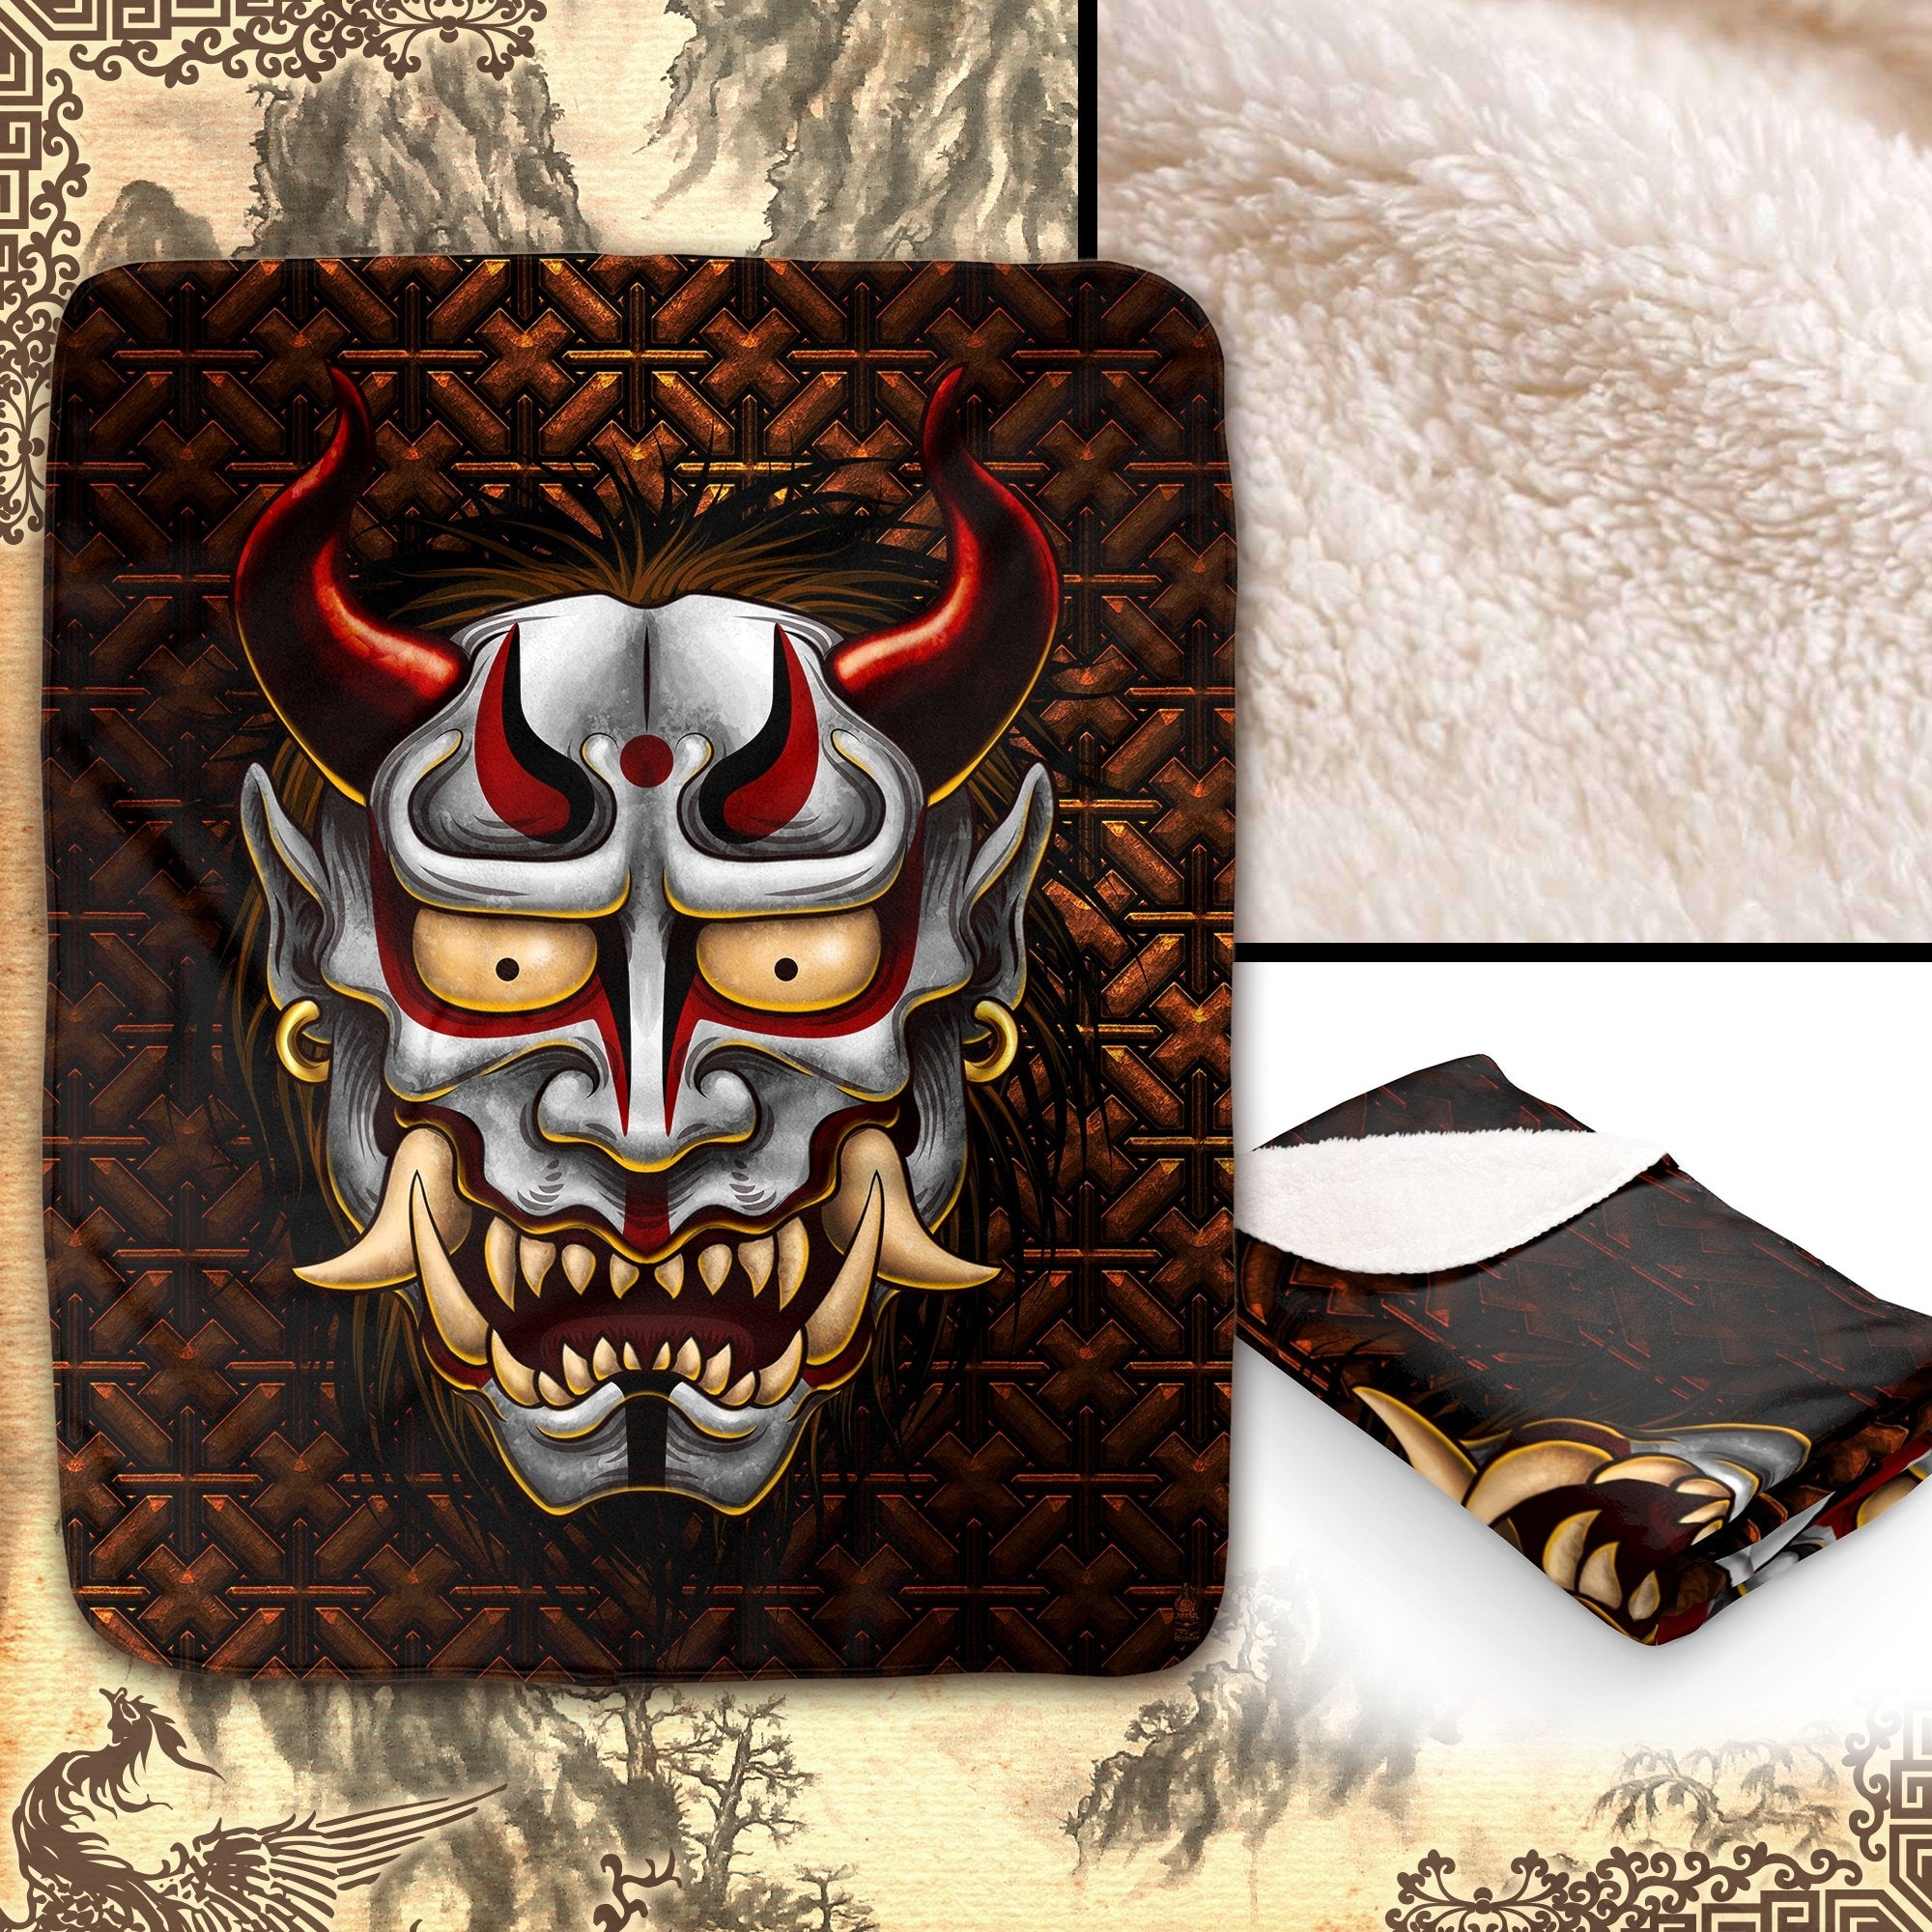 Oni Throw Fleece Blanket, Japanese Demon, Alternative Home Decor, Eclectic and Funky Gift - White - Abysm Internal